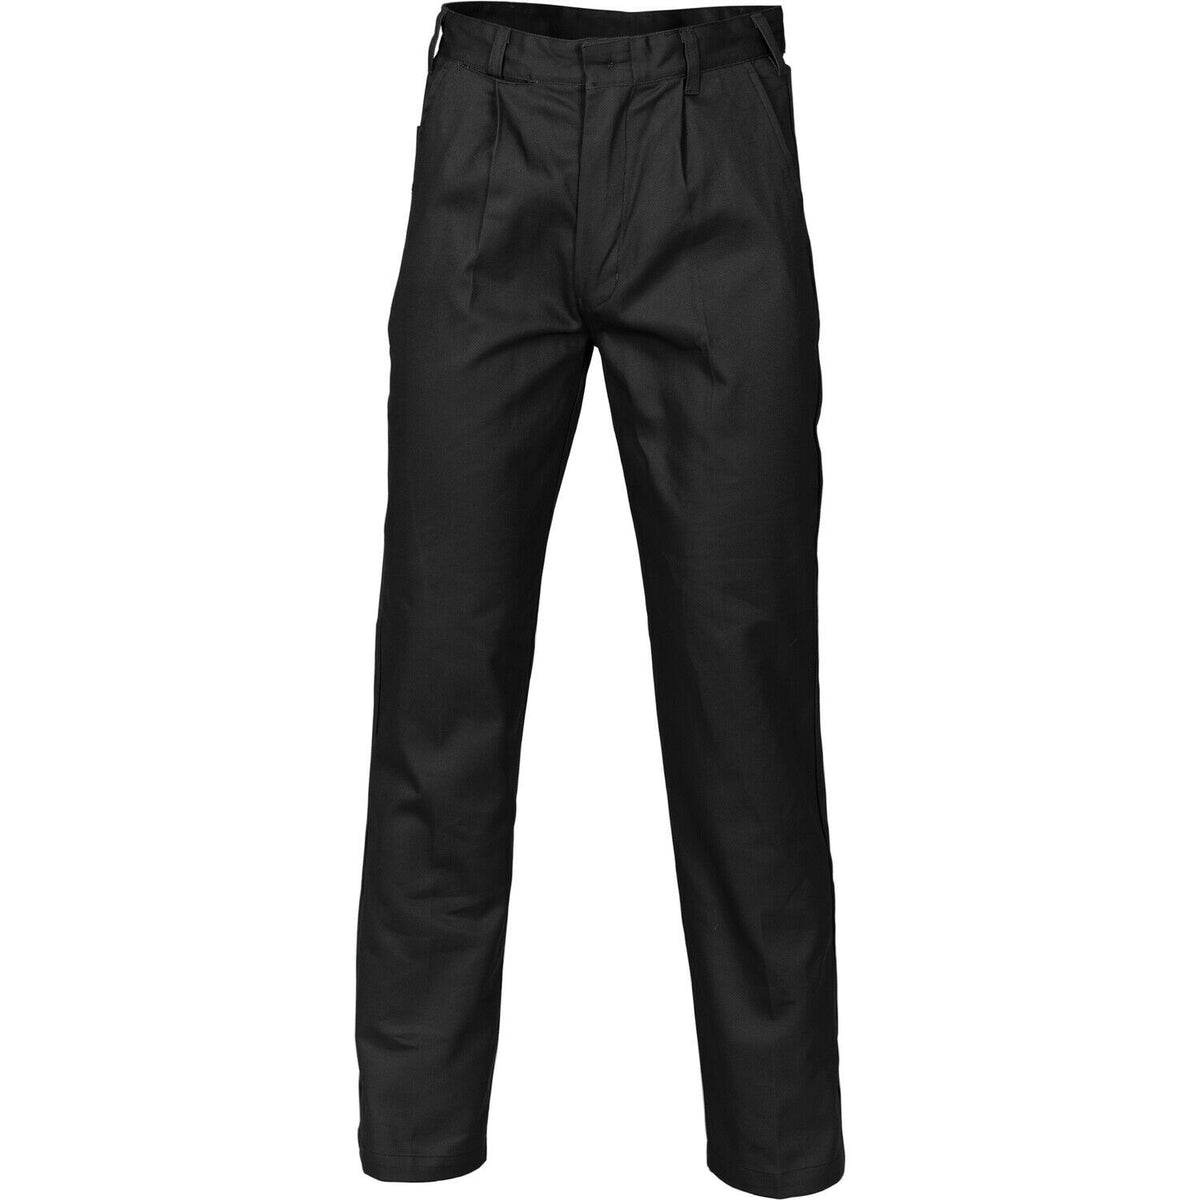 DNC Workwear Mens Cotton Drill Work Pants Comfortable Heavyweight Work 3311-Collins Clothing Co